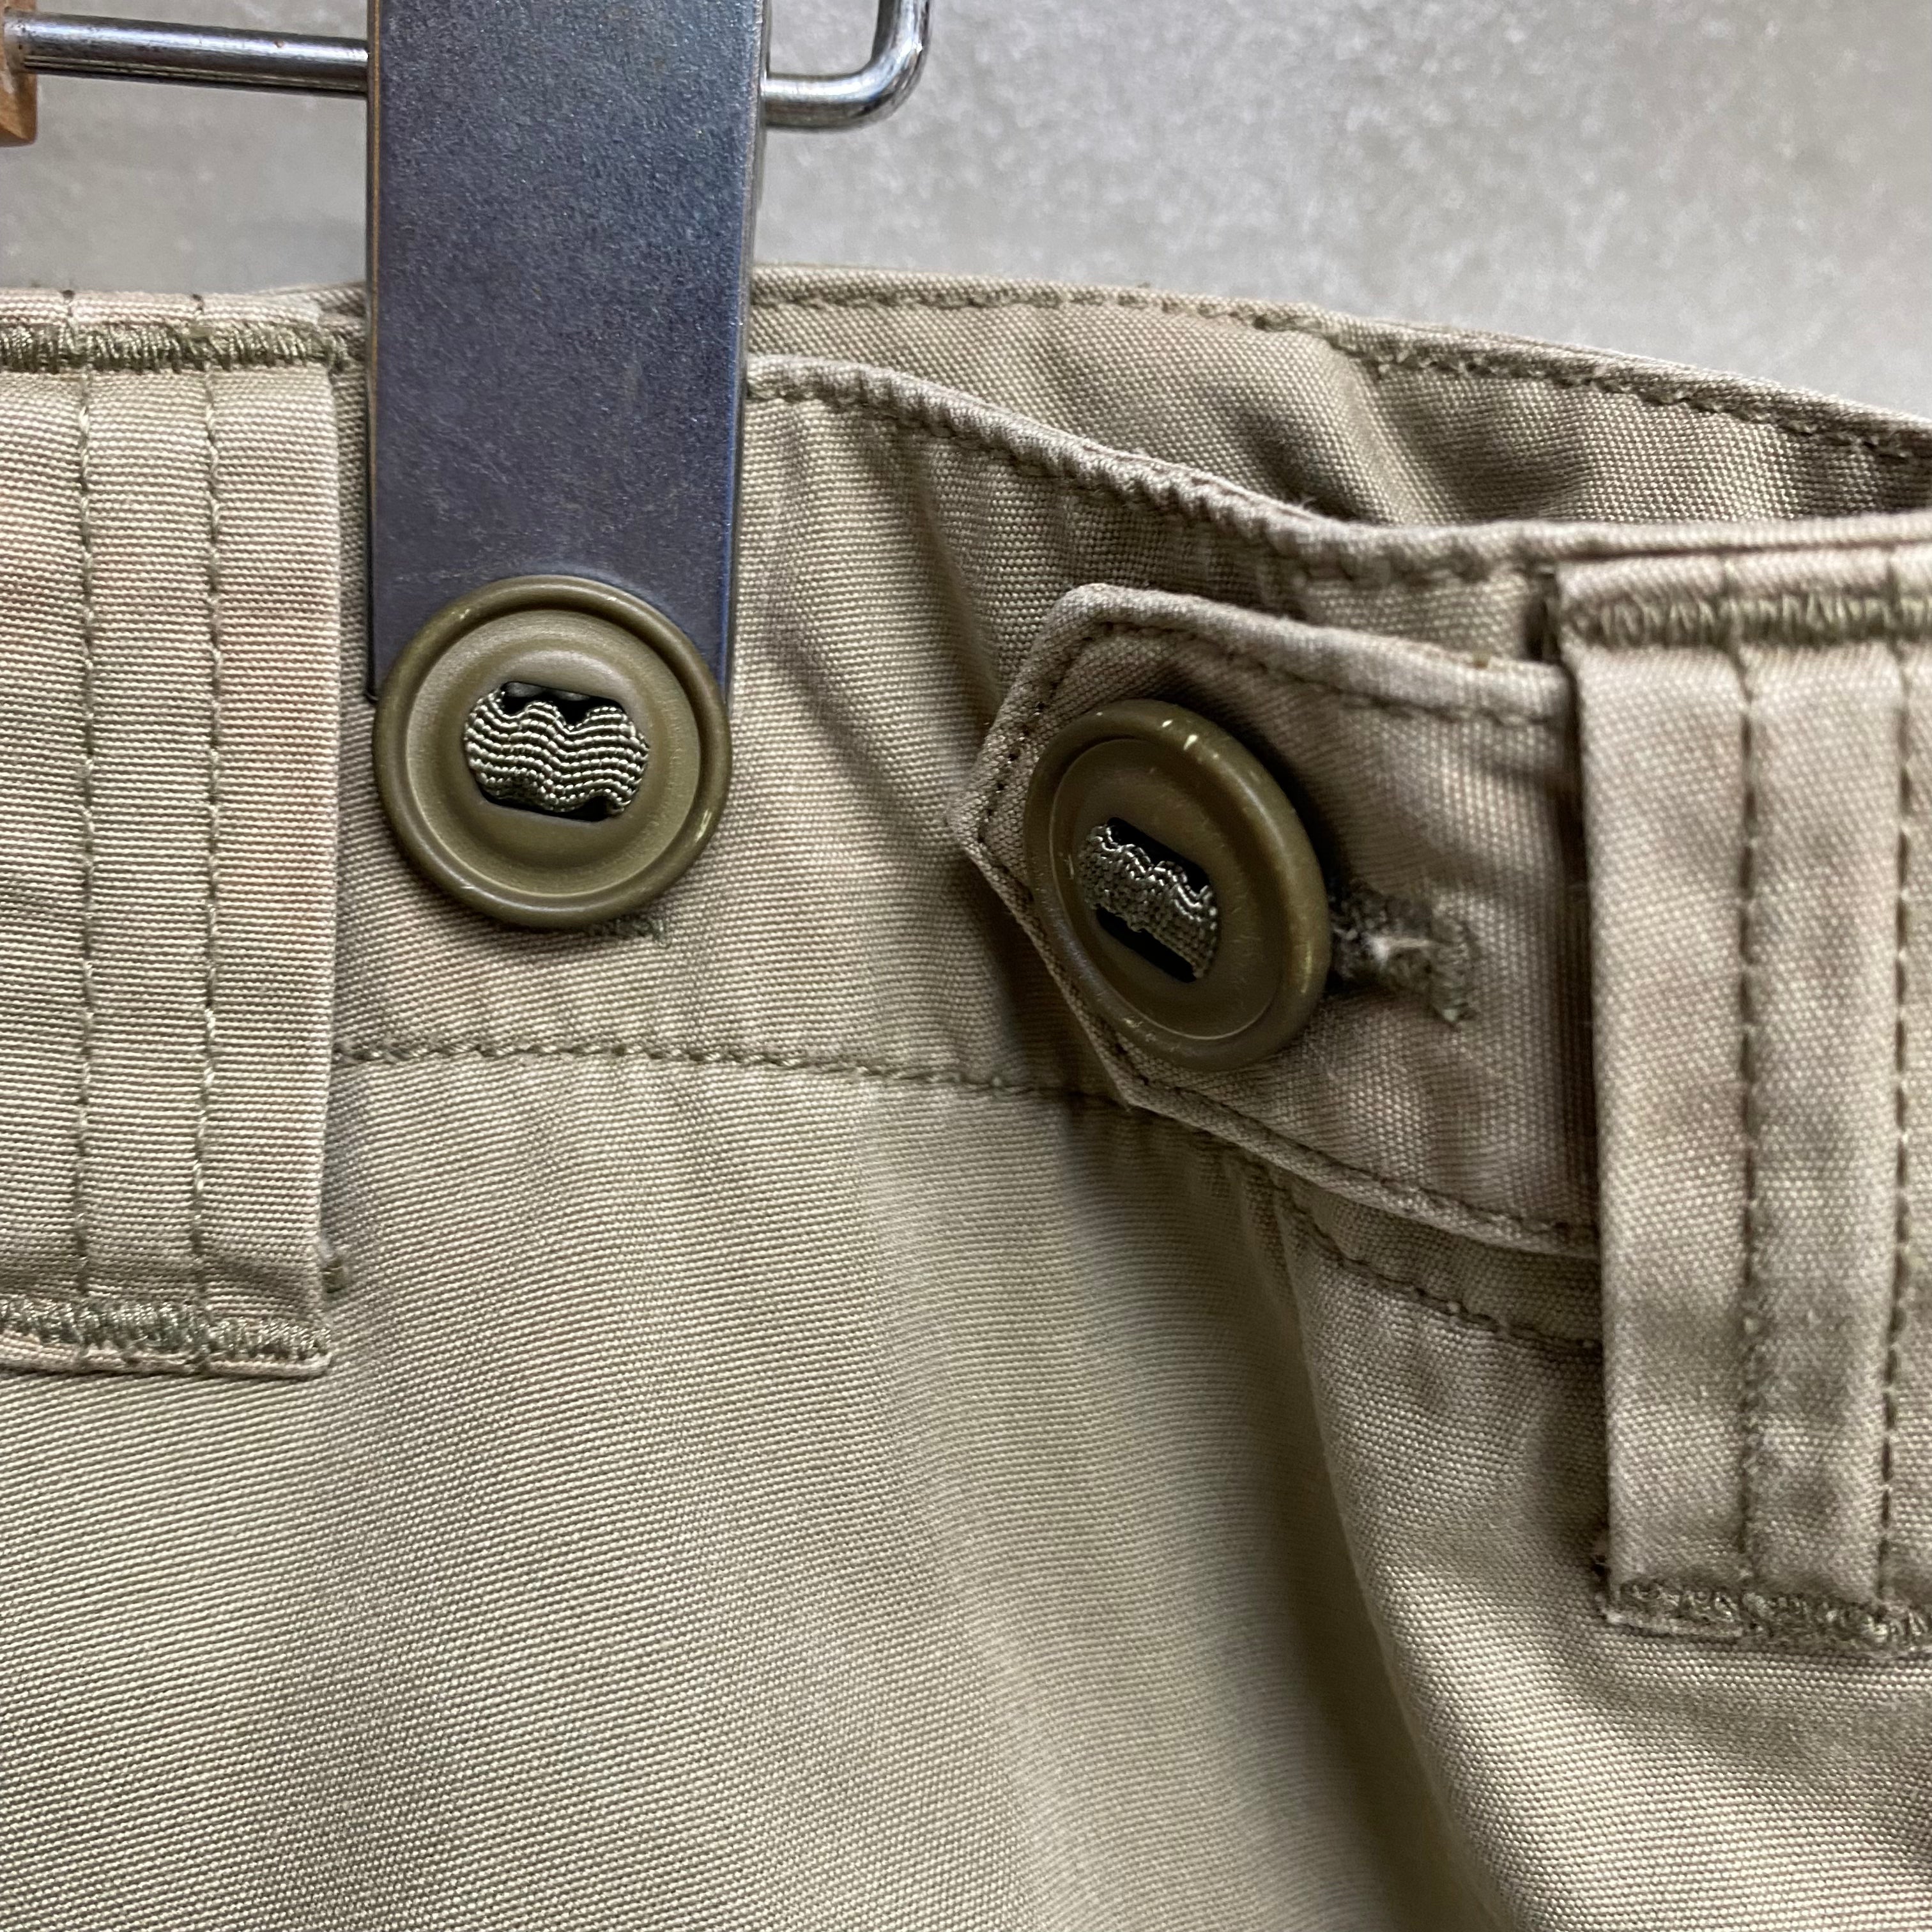 [ ONLY ONE ! ] WTAPS CARGO PANTS / ARCHIVE